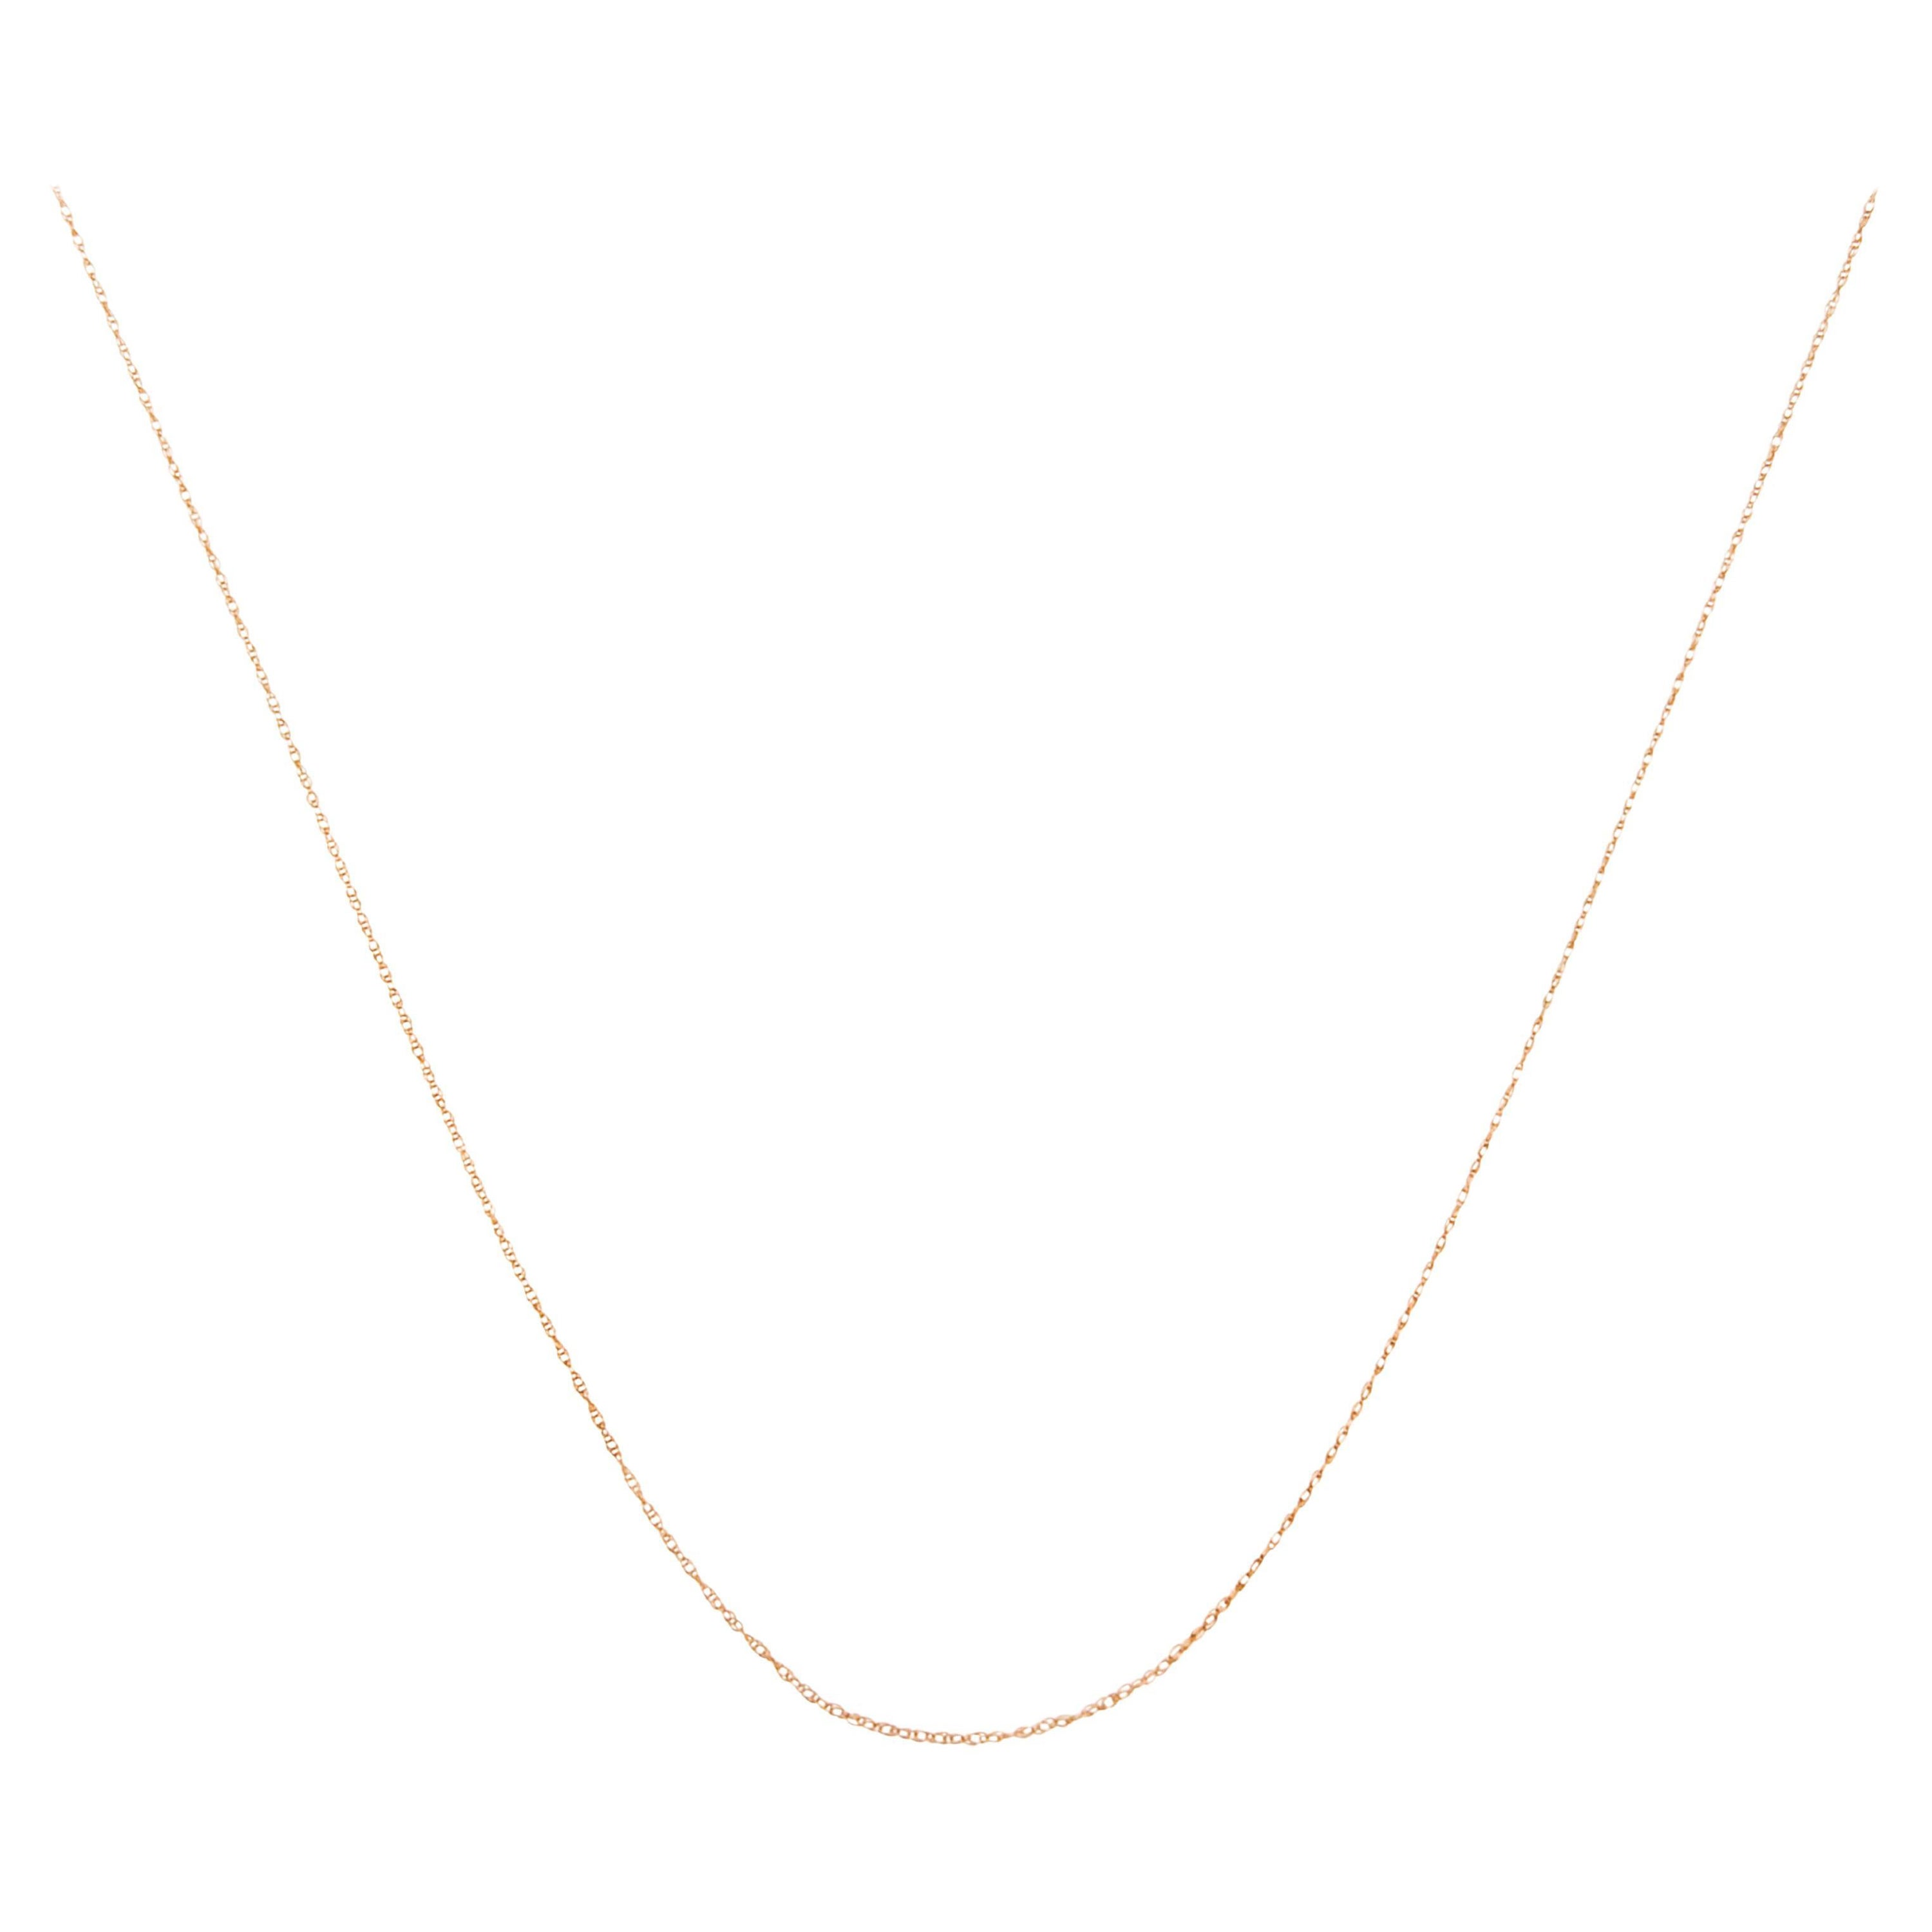 Solid 10K Rose Gold Rope Chain Necklace Unisex Chain